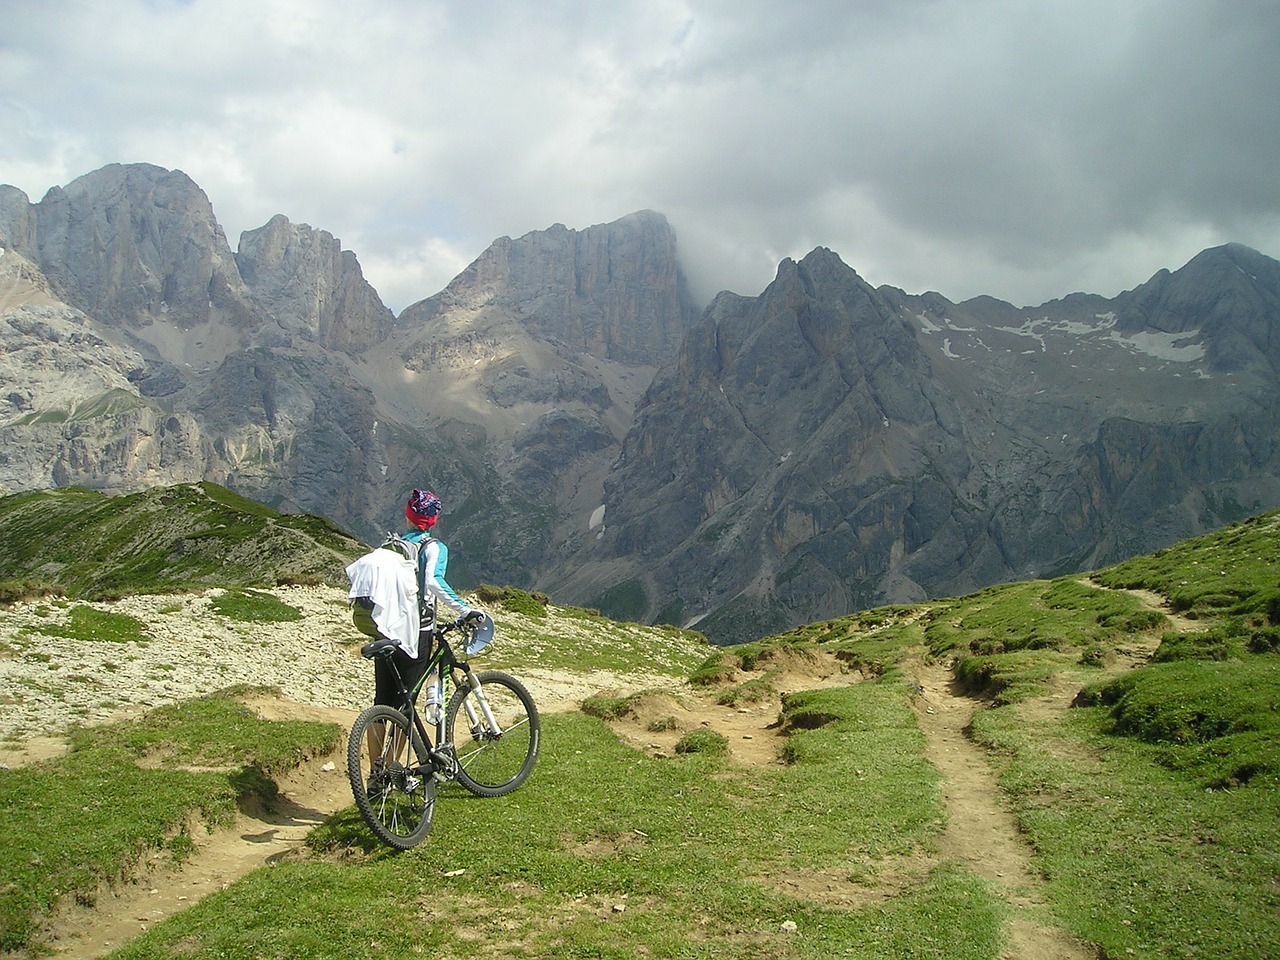 Cyclist holding a bike, standing and looking at a mountain in front of them, facing away from the camera.